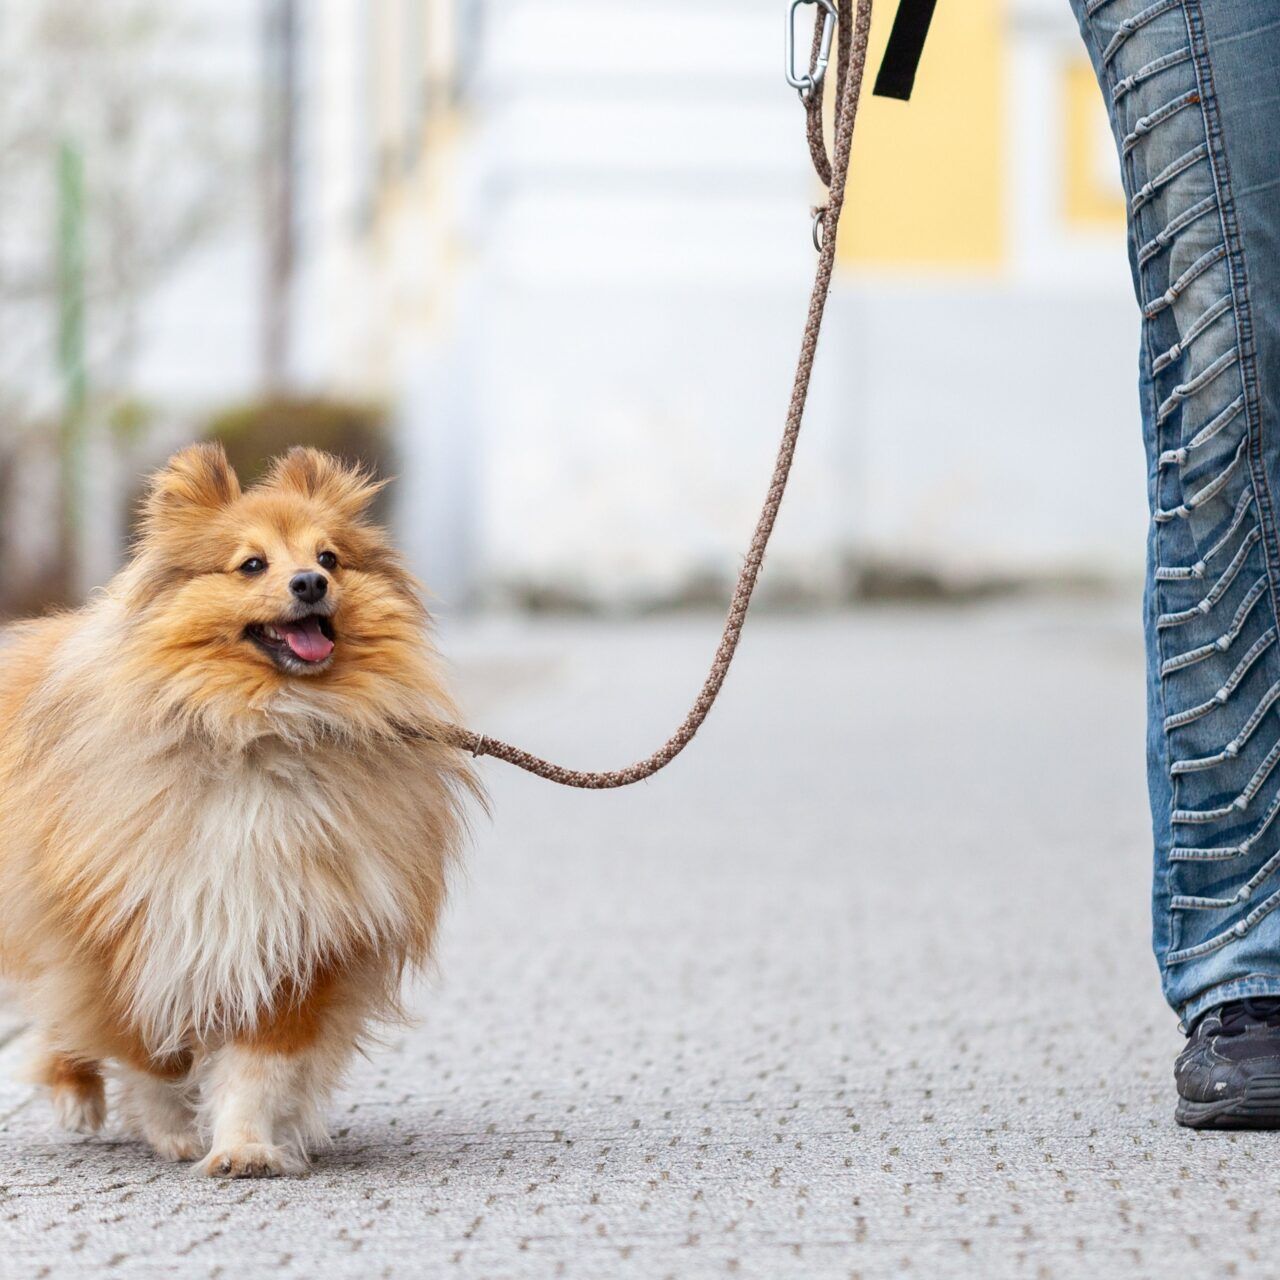 Dog and owners legs walking on a lead in the street